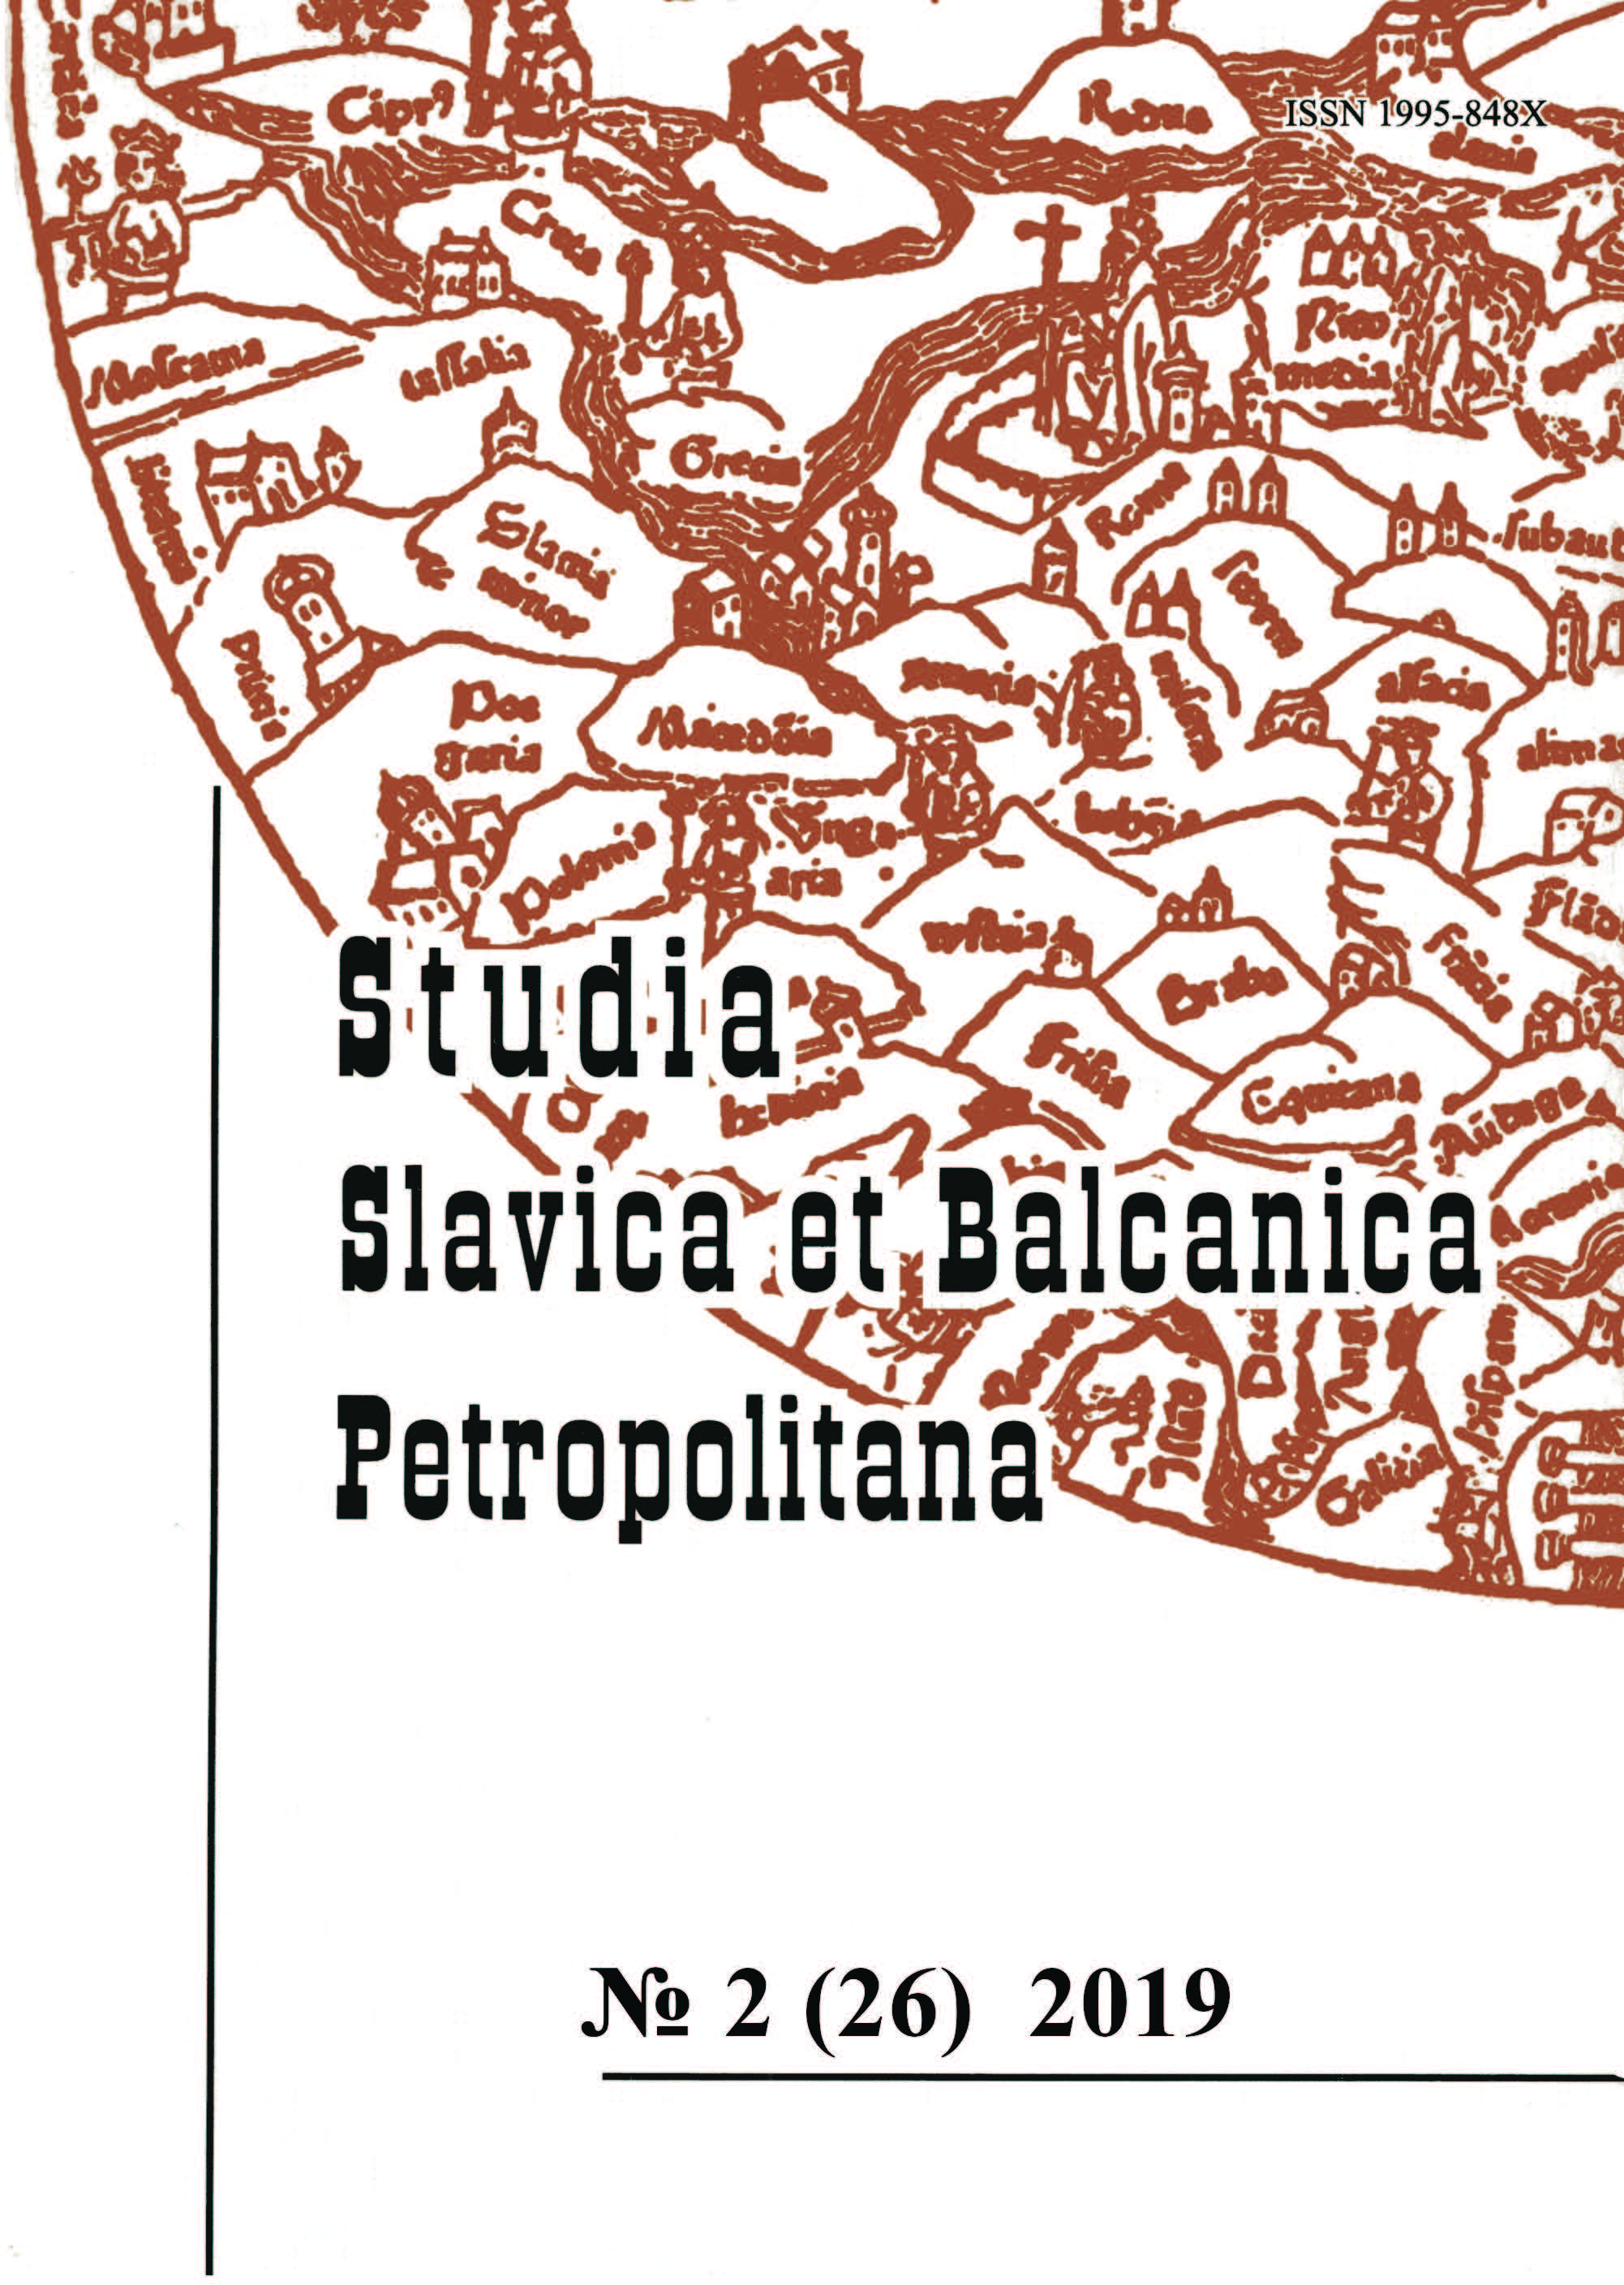 13th Conference on Baltic Studies in Europe, Gdańsk, June 26–29, 2019